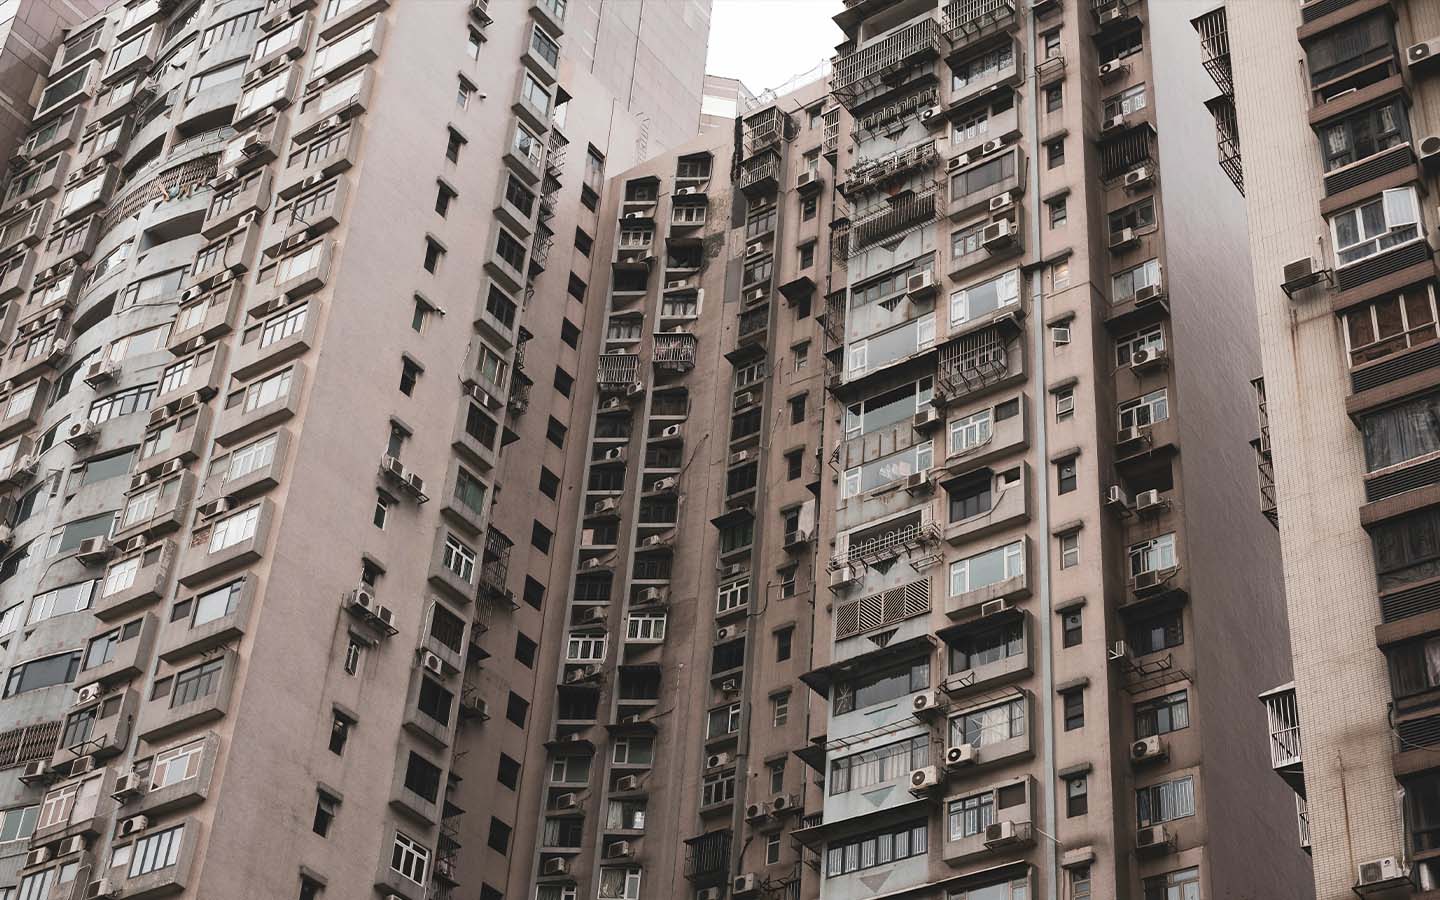 Macao’s realtors call for an end to all market cooling measures